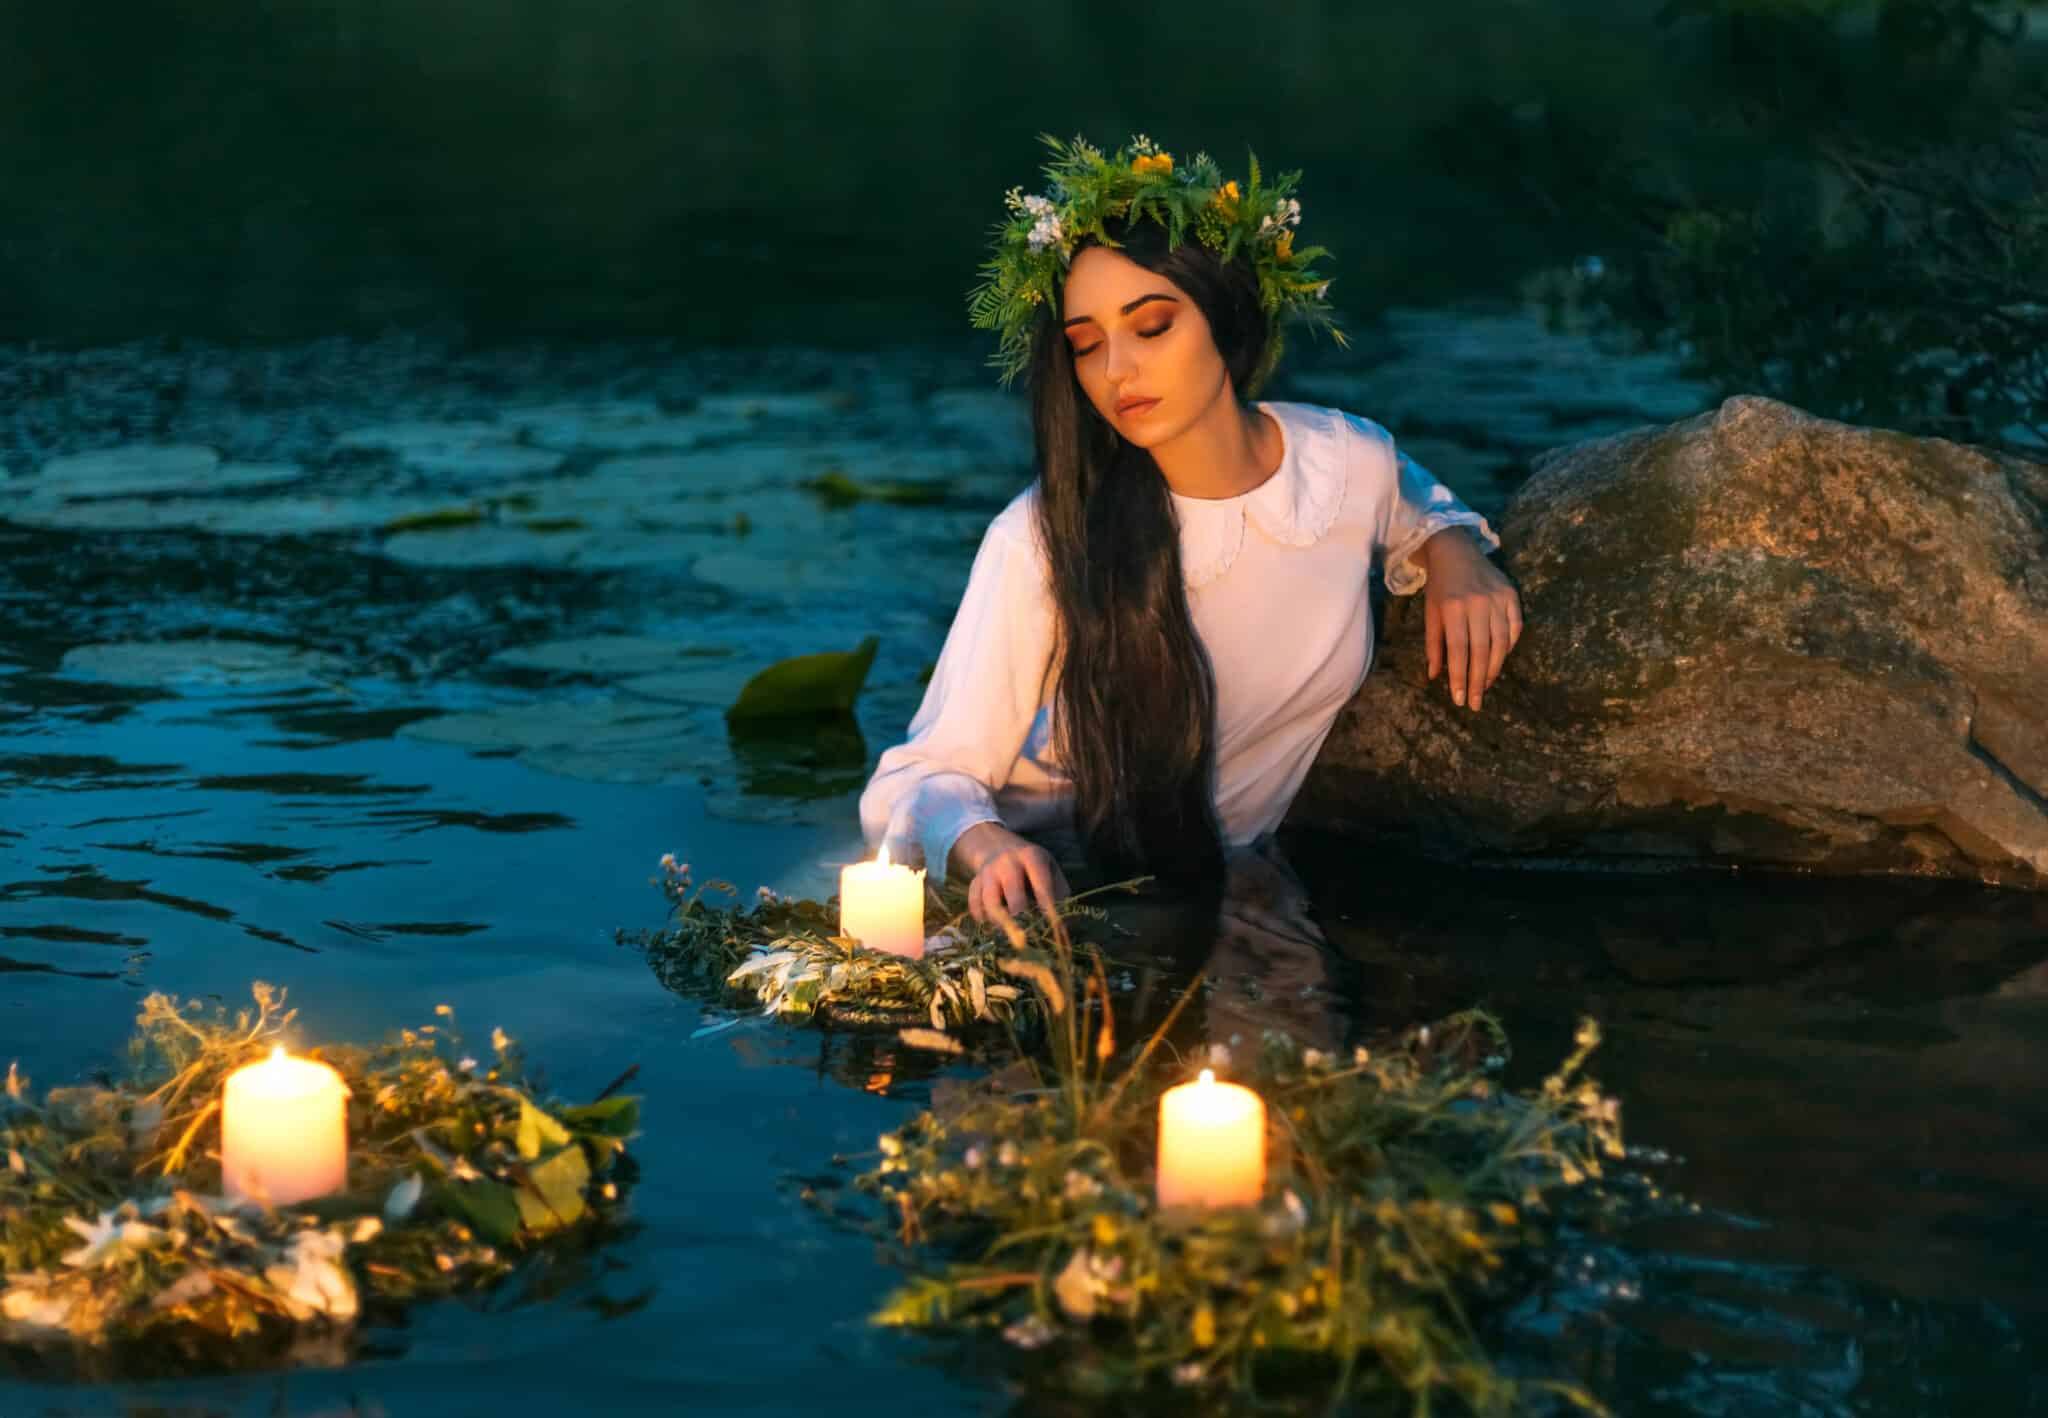 A nymph stands in water with floating wreath and candles burning